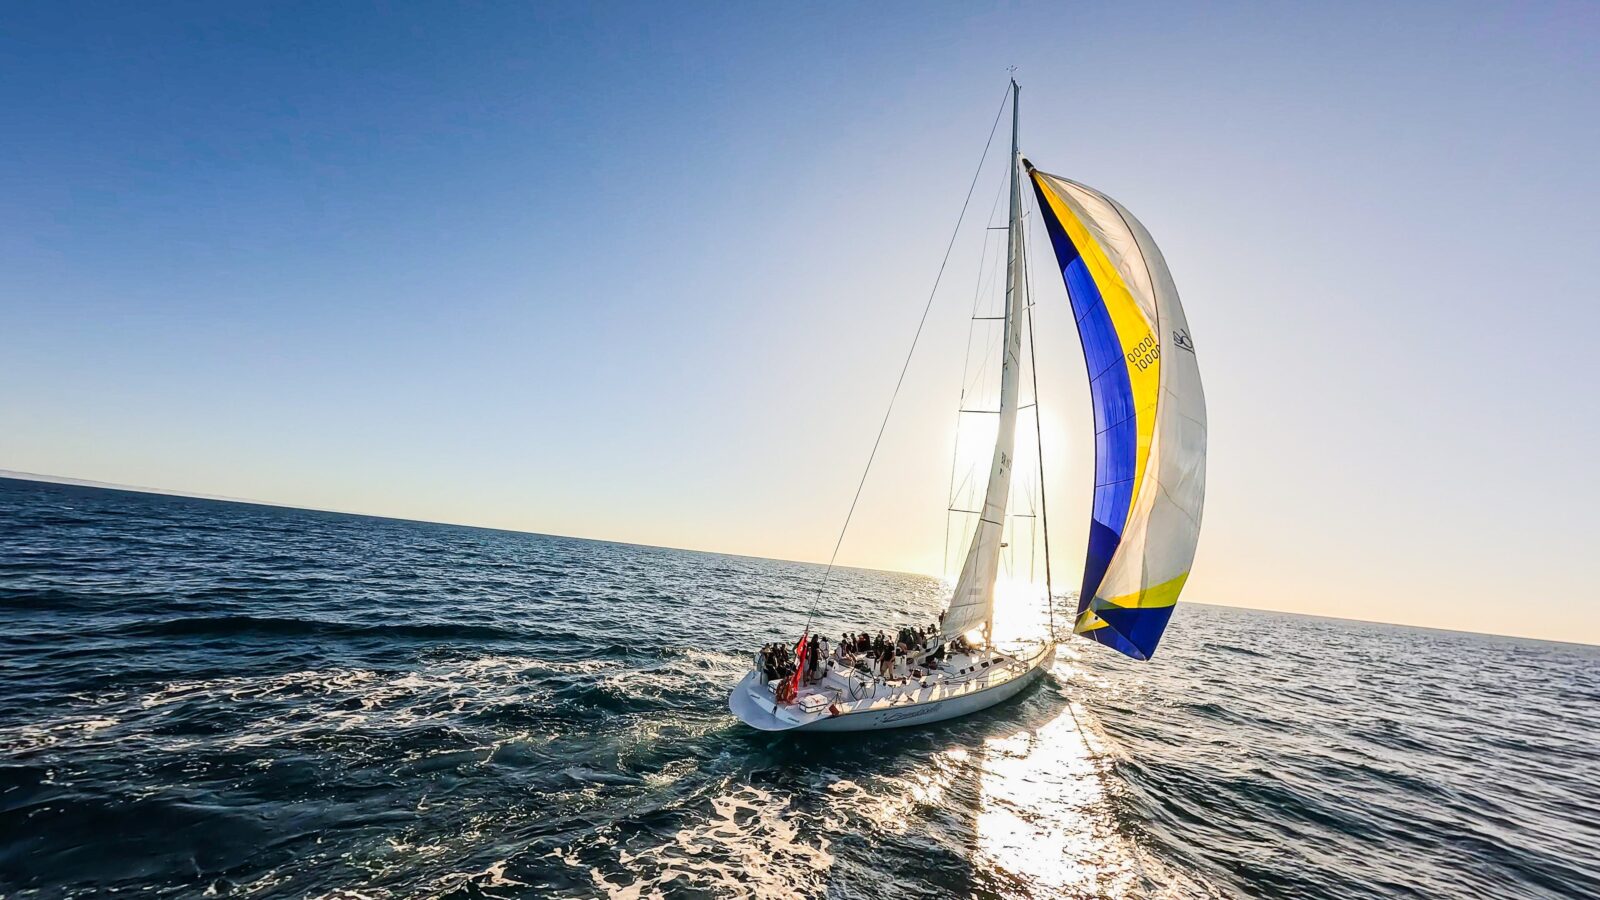 Brindabella in full sail with spinnaker